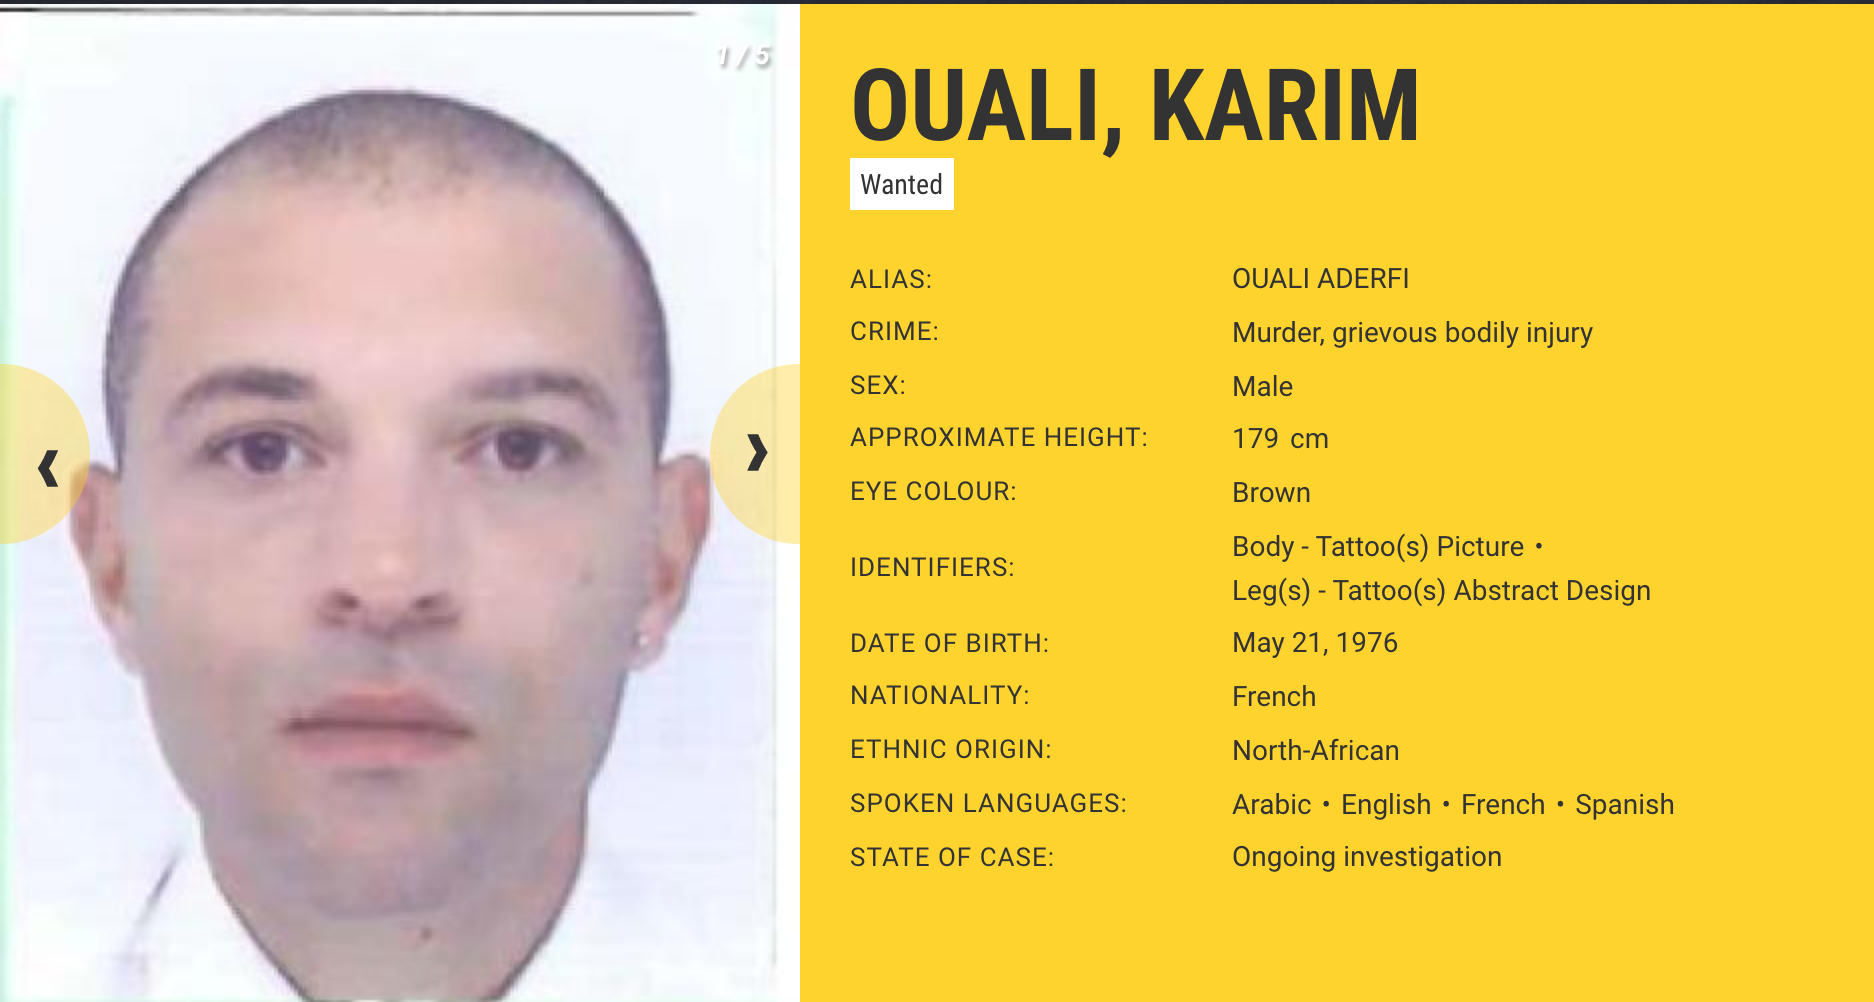 Karim Ouali, a French national, is a fugitive on the EU’s Most Wanted Criminals list. French police say he is living undocumented in Hong Kong. Photo via European Network of Fugitive Active Search Teams